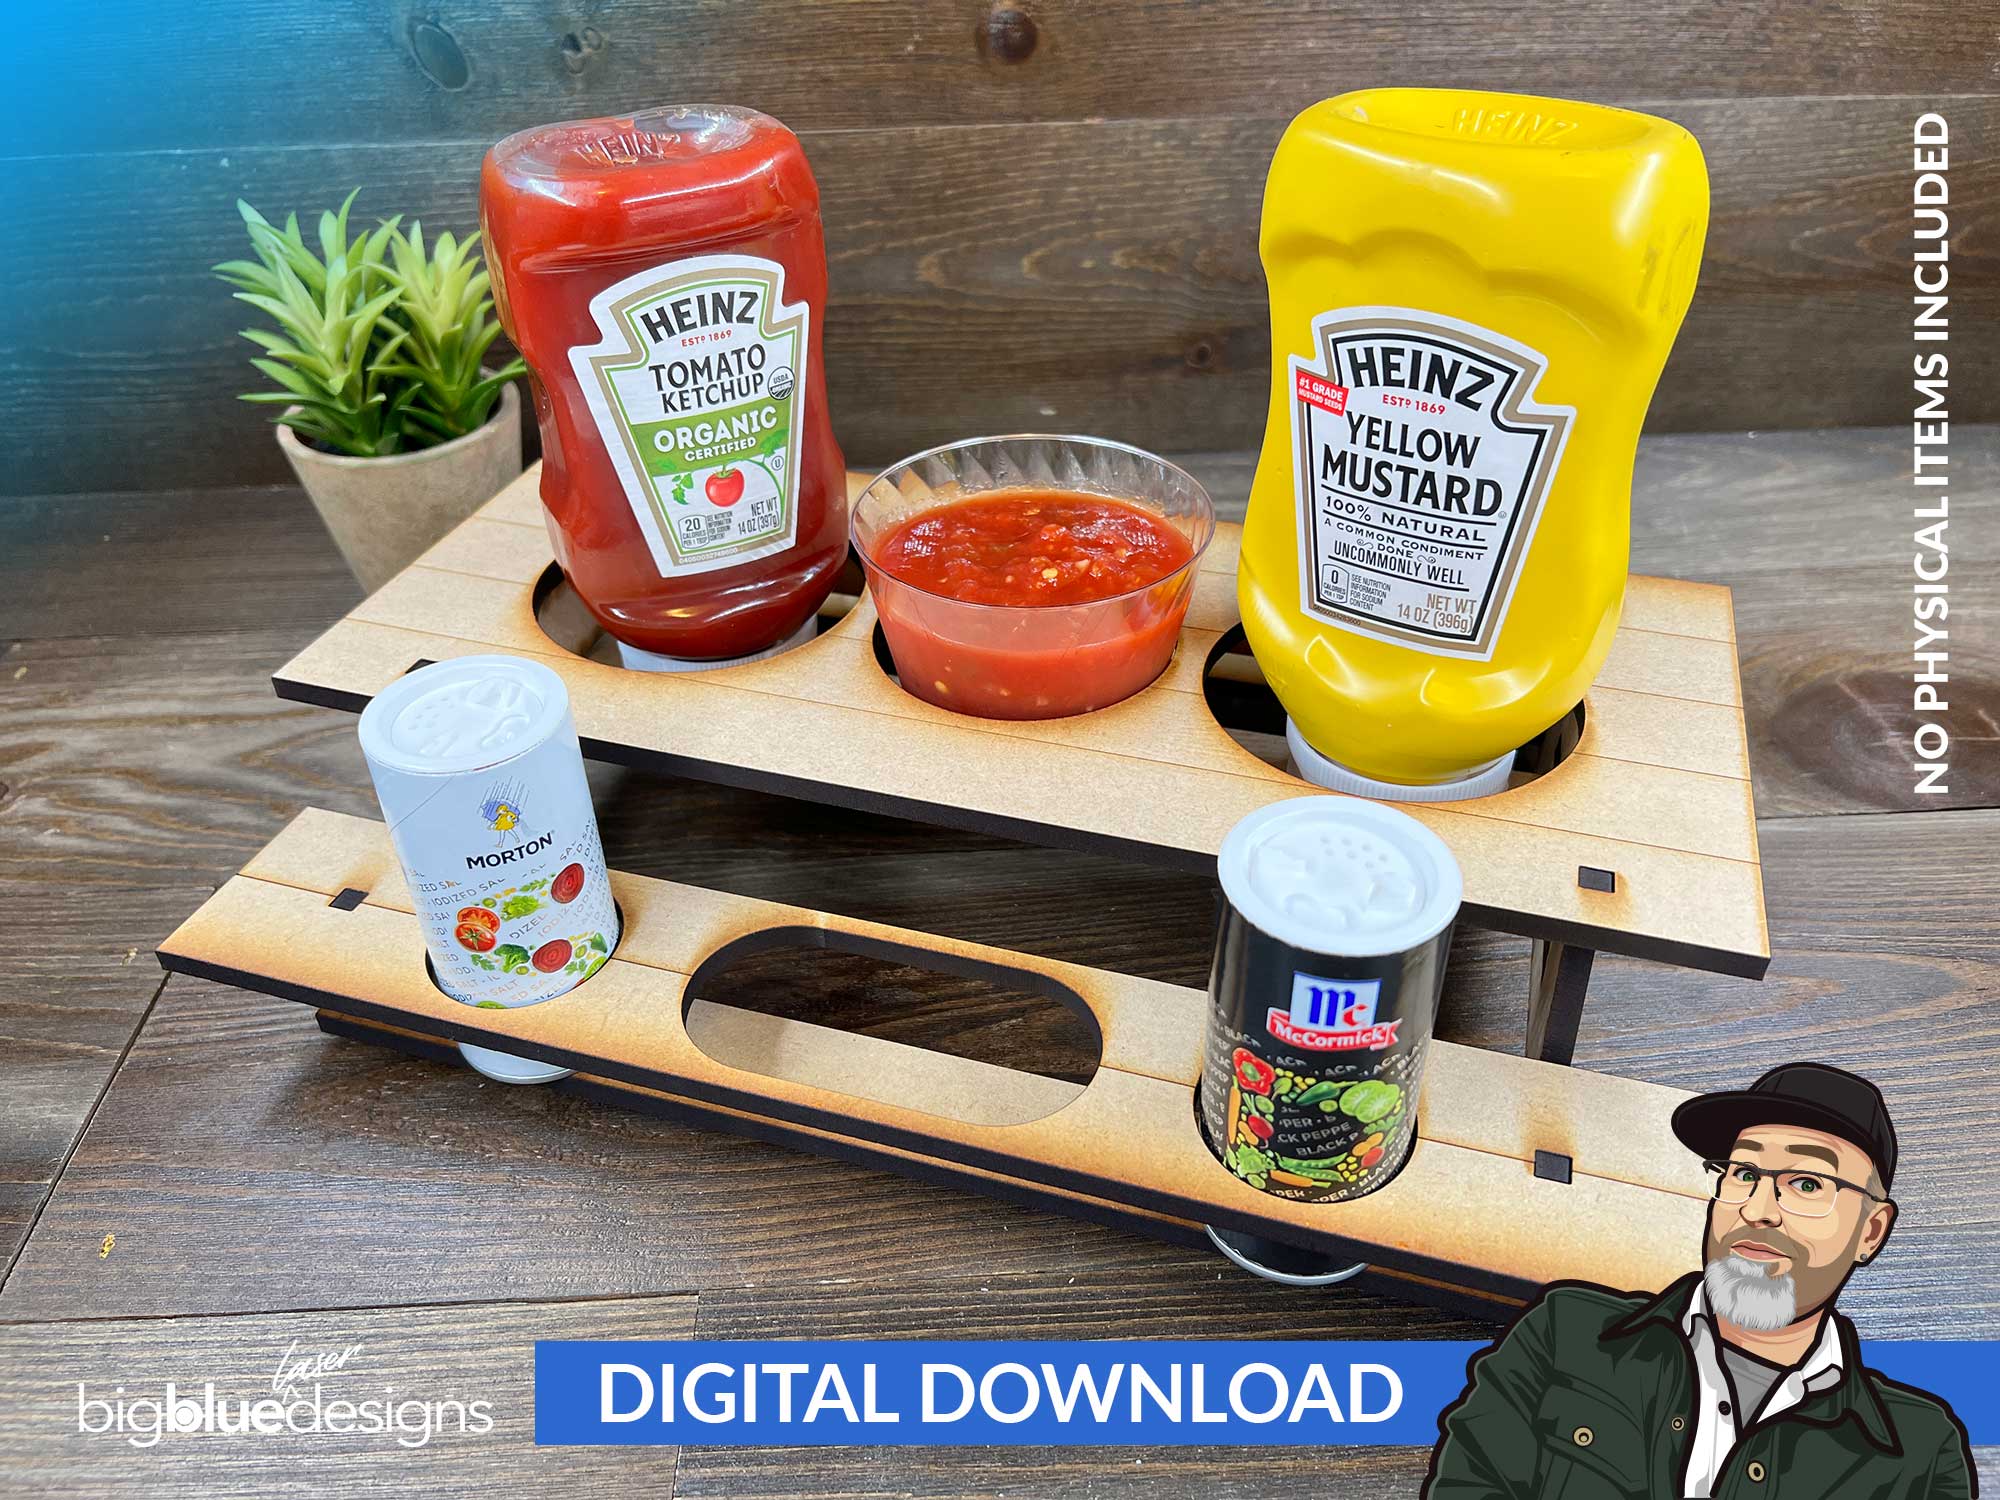 Match Hot Sauce Holder - The Kitchen Table